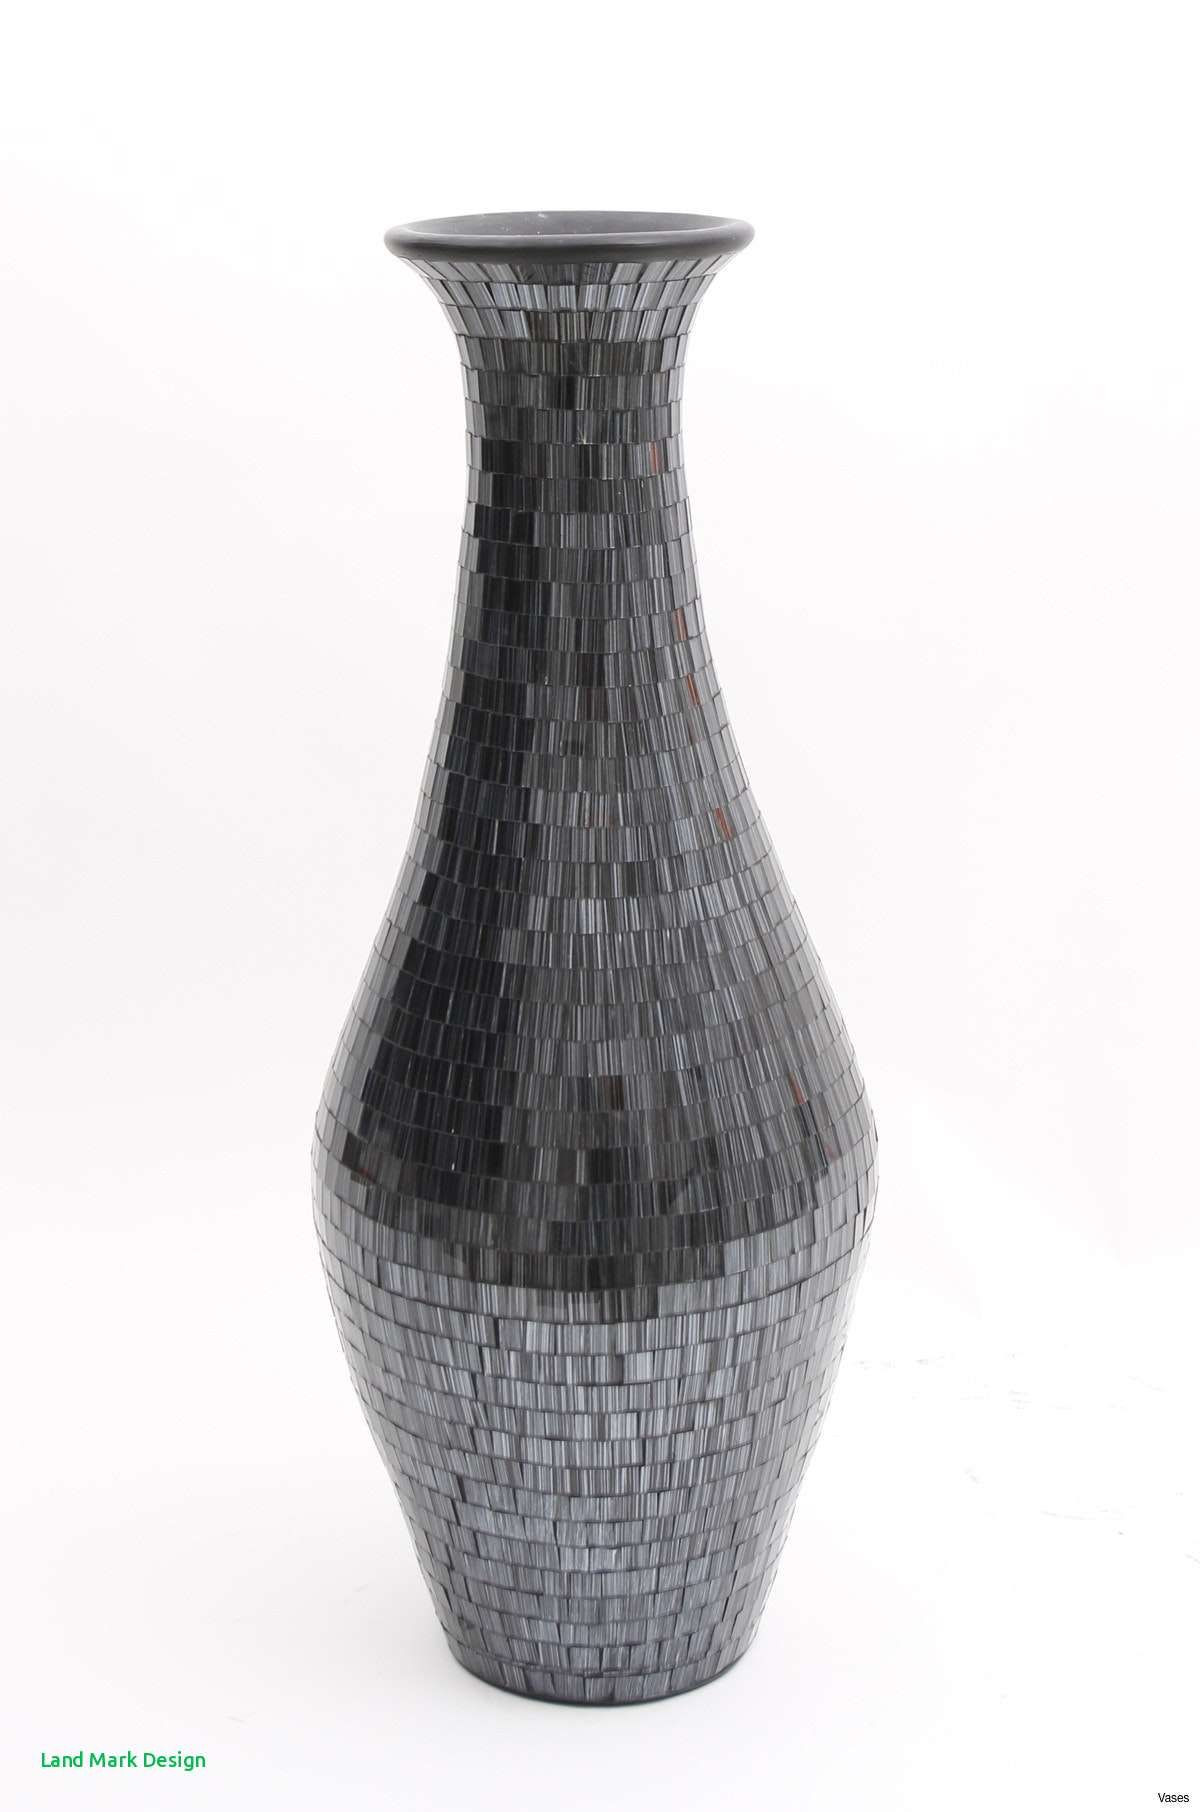 flat fish bowl vase of 50 smoked glass vase the weekly world with regard to giant vases design